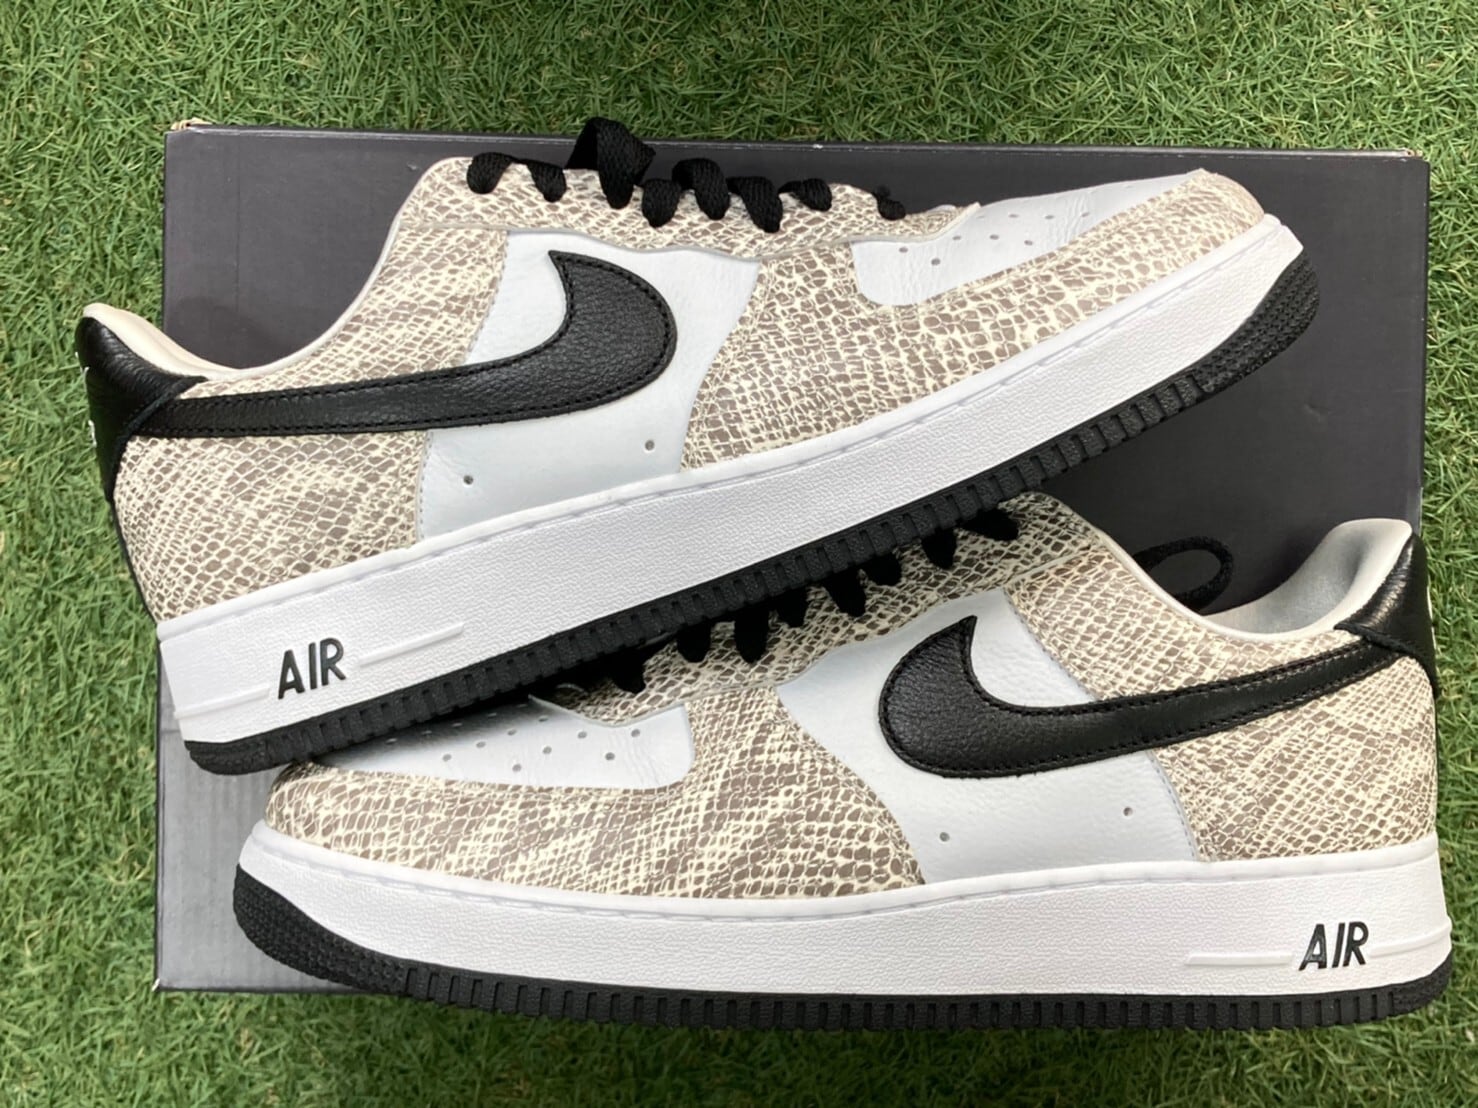 NIKE AIR FORCE 1 LOW COCOA SNAKE 28cm - スニーカー